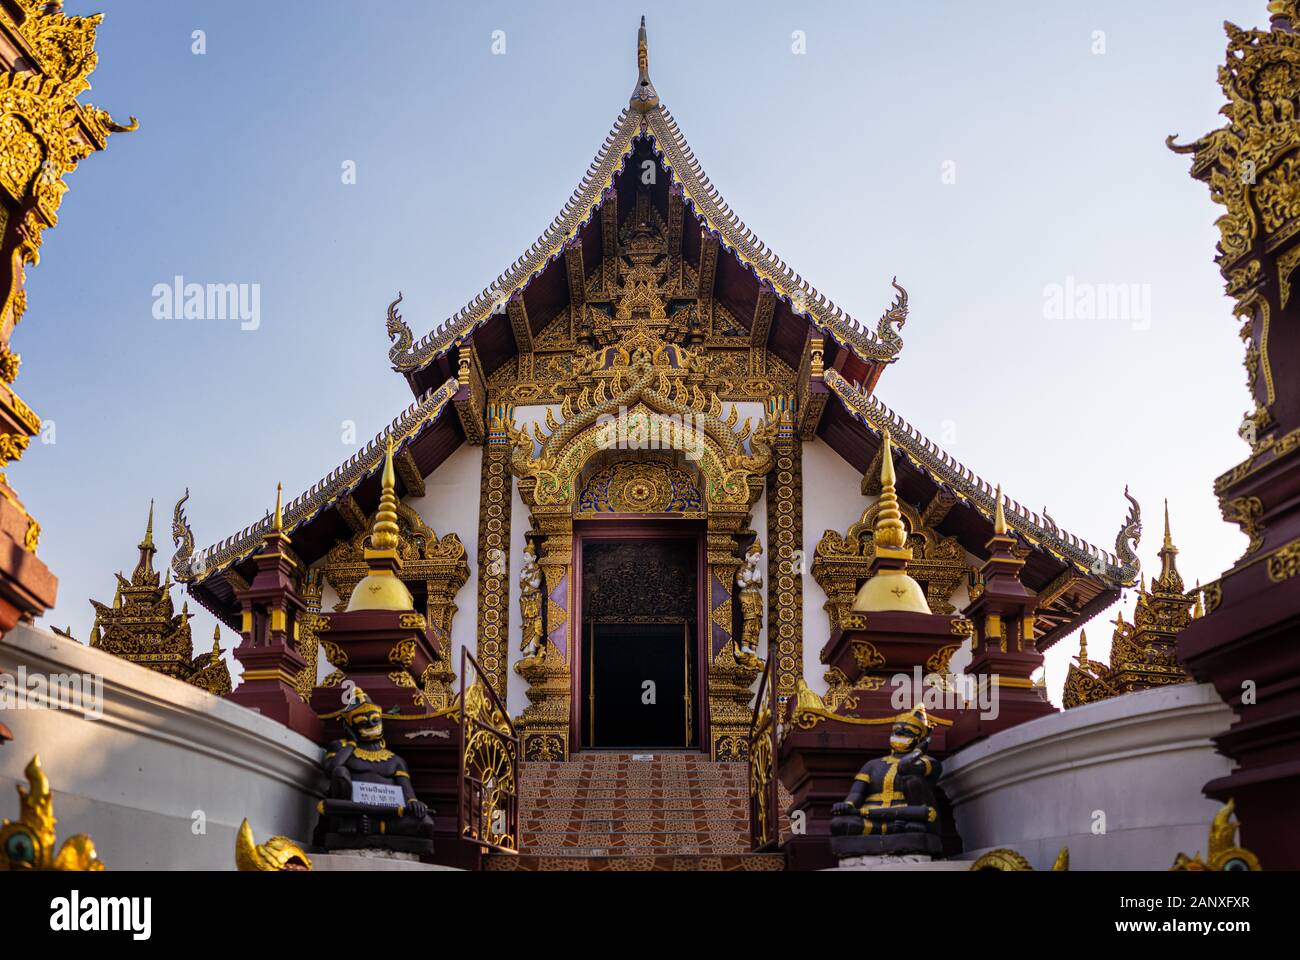 This is the picture of Wat Rajamontean, Buddhist Temple in Chiang Mai, Thailand Stock Photo